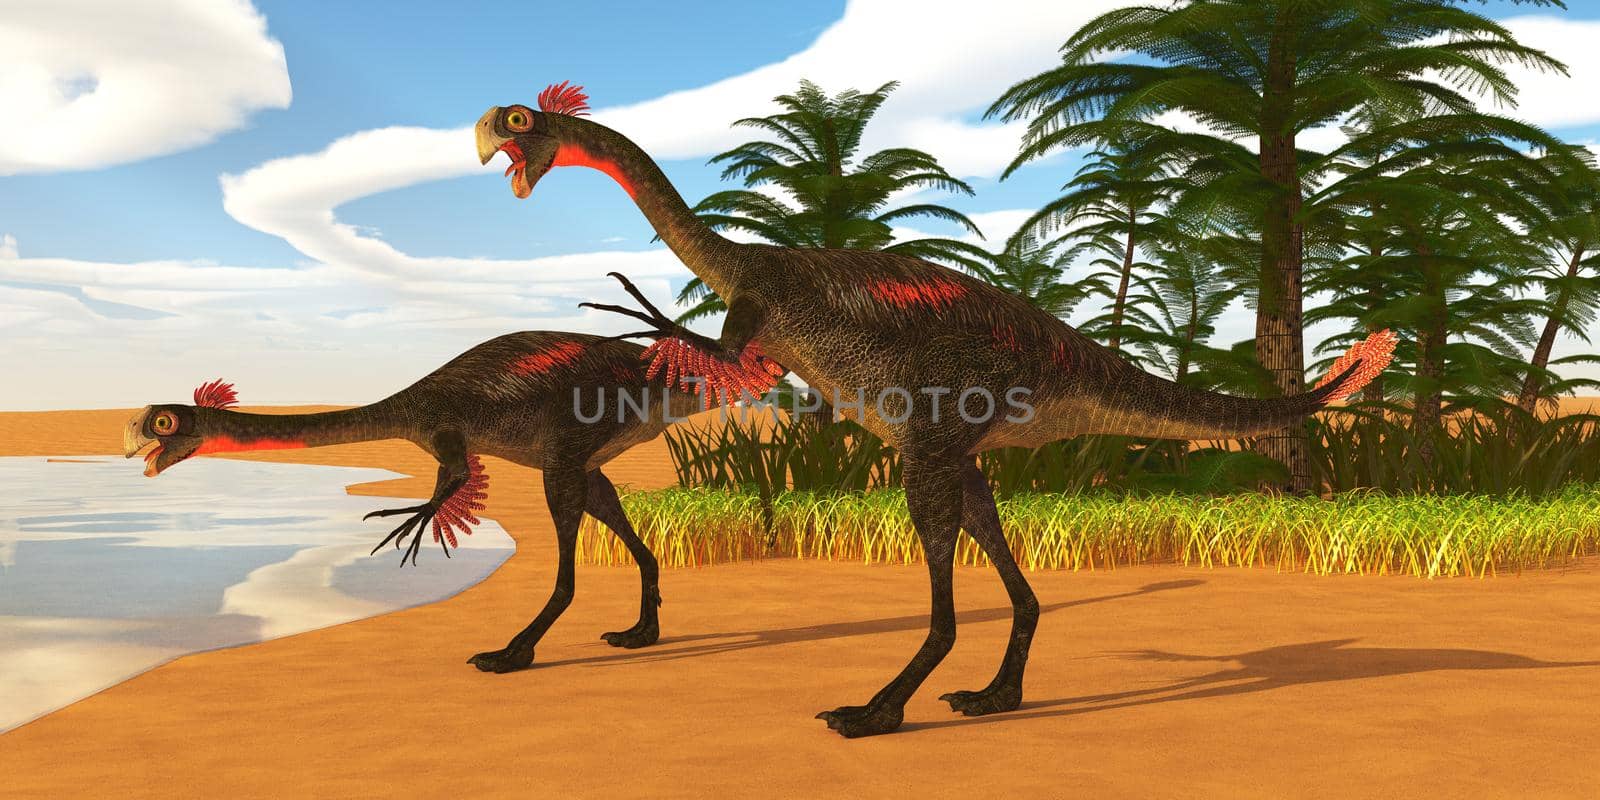 Gigantoraptor theropod dinosaurs come down to a lake to drink in Mongolia, China during the Cretaceous Period.